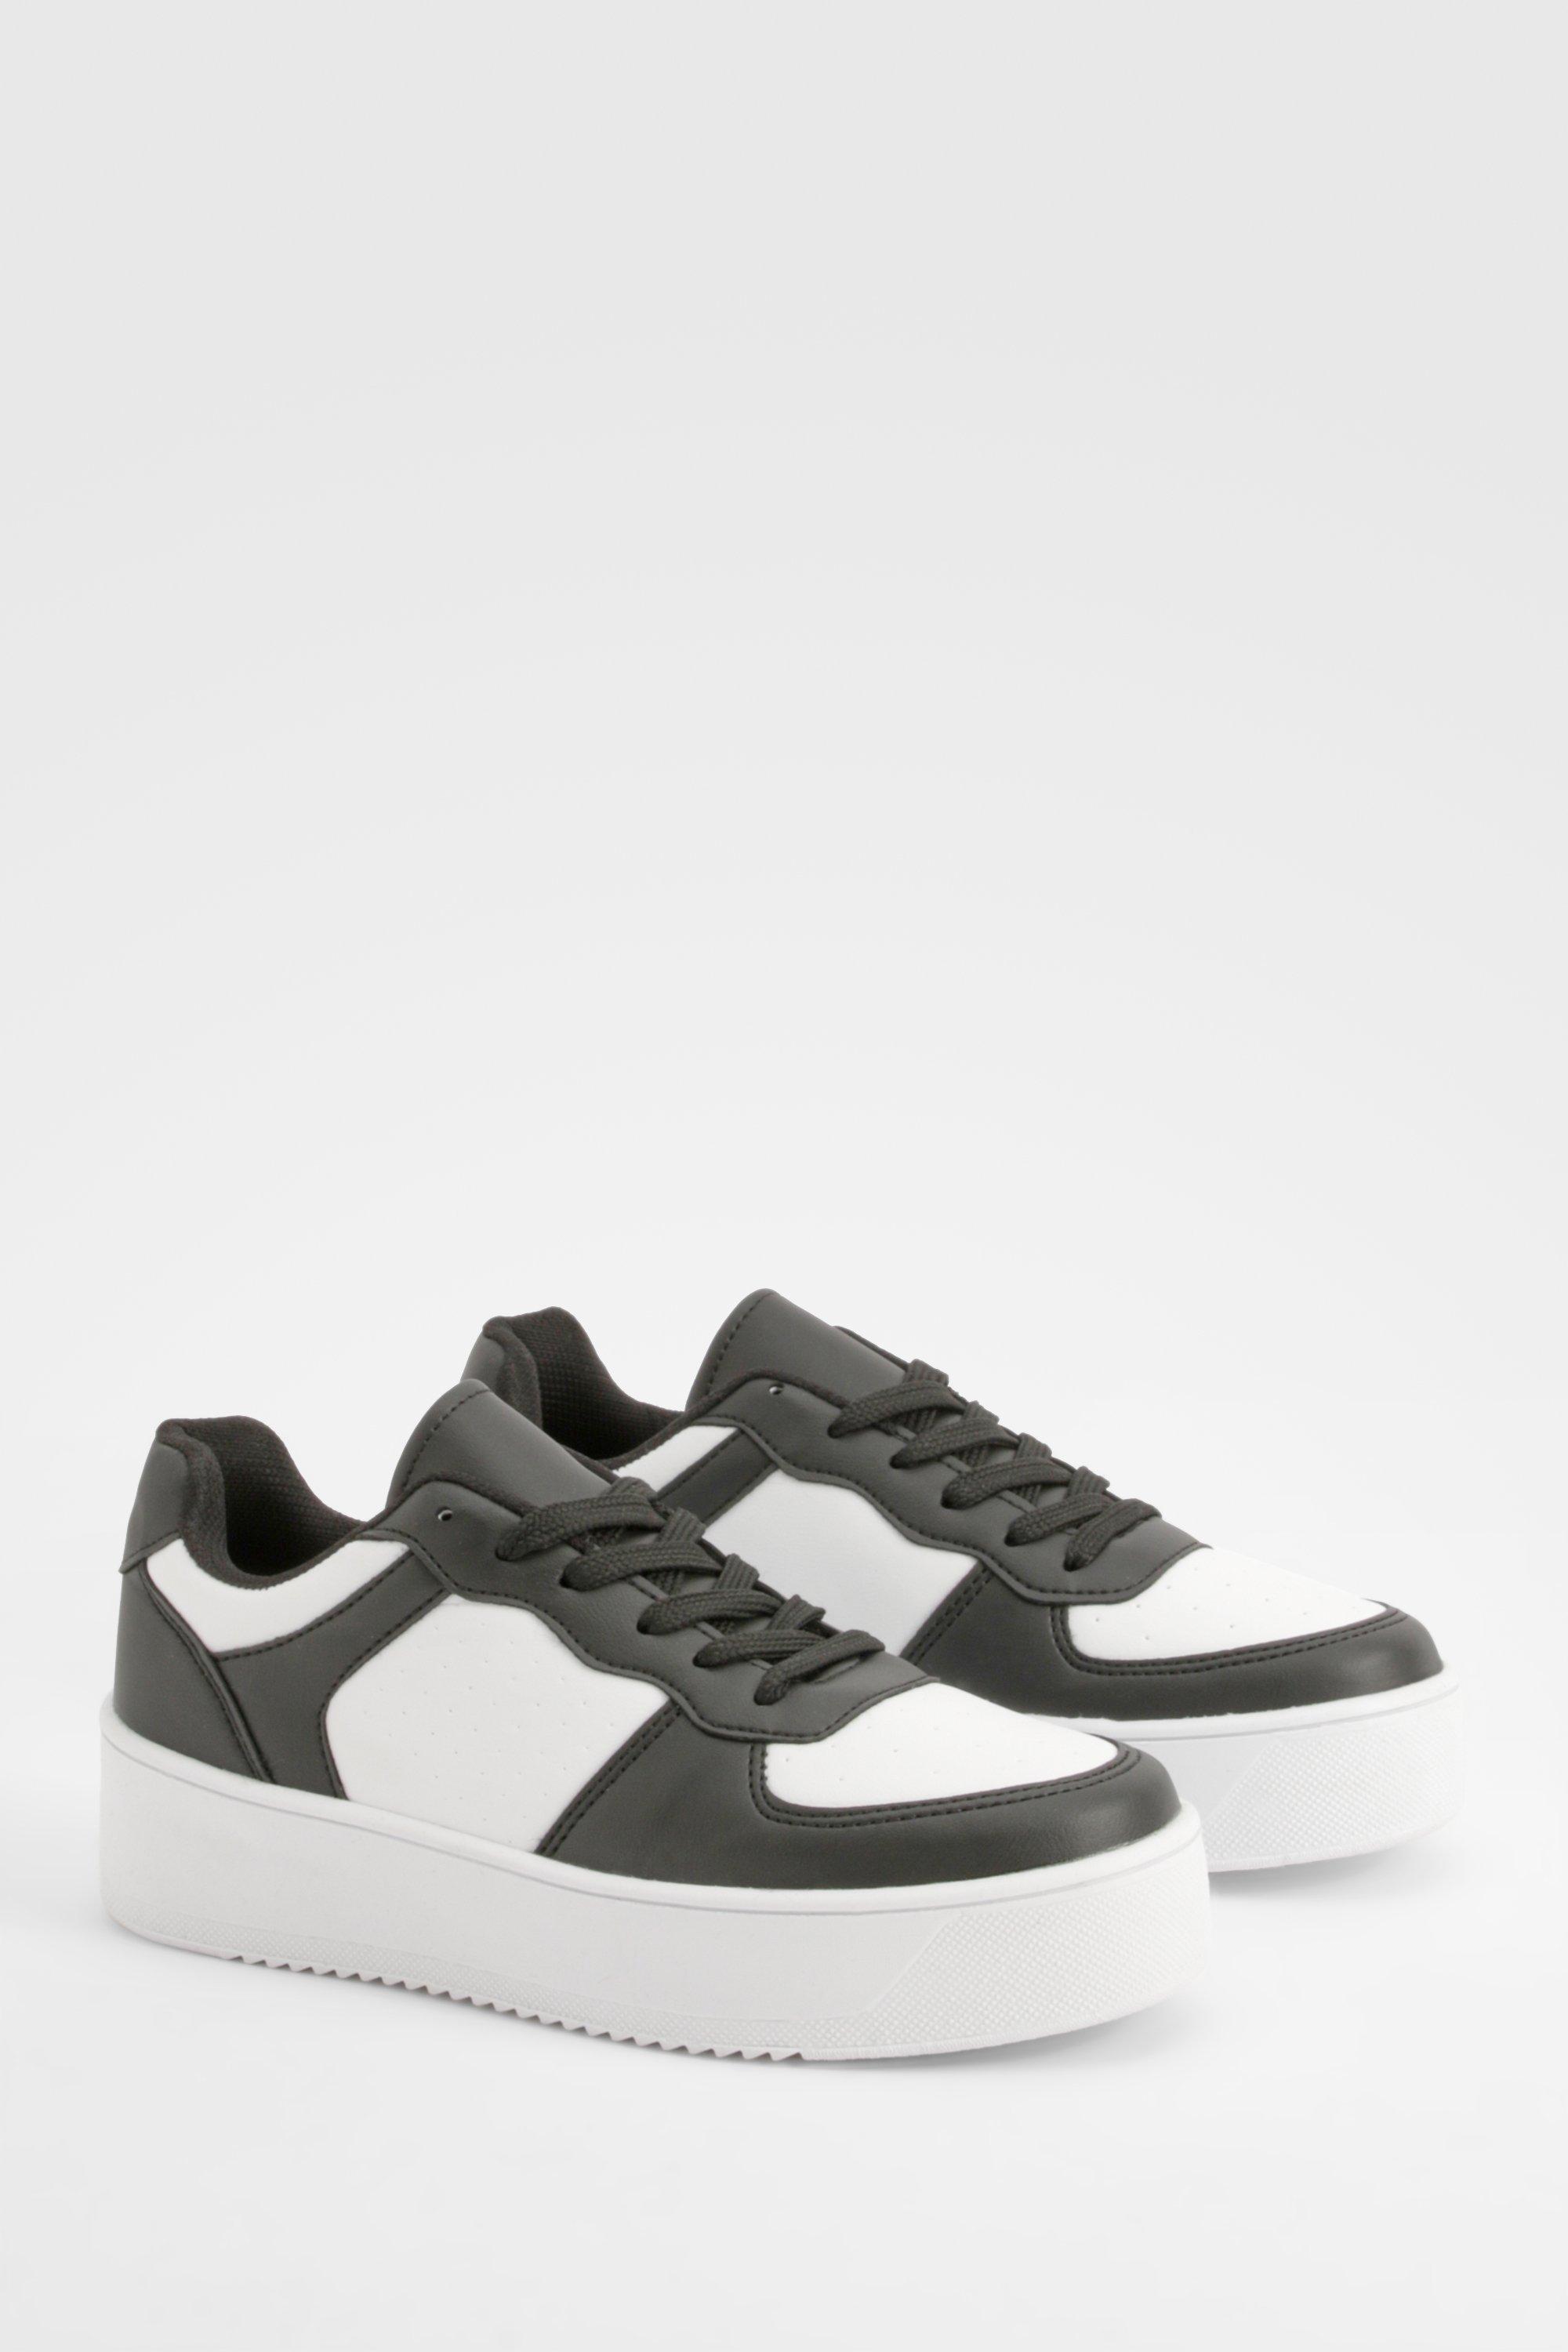 Image of Chunky Platform Sole Contrast Panel Trainers, Nero